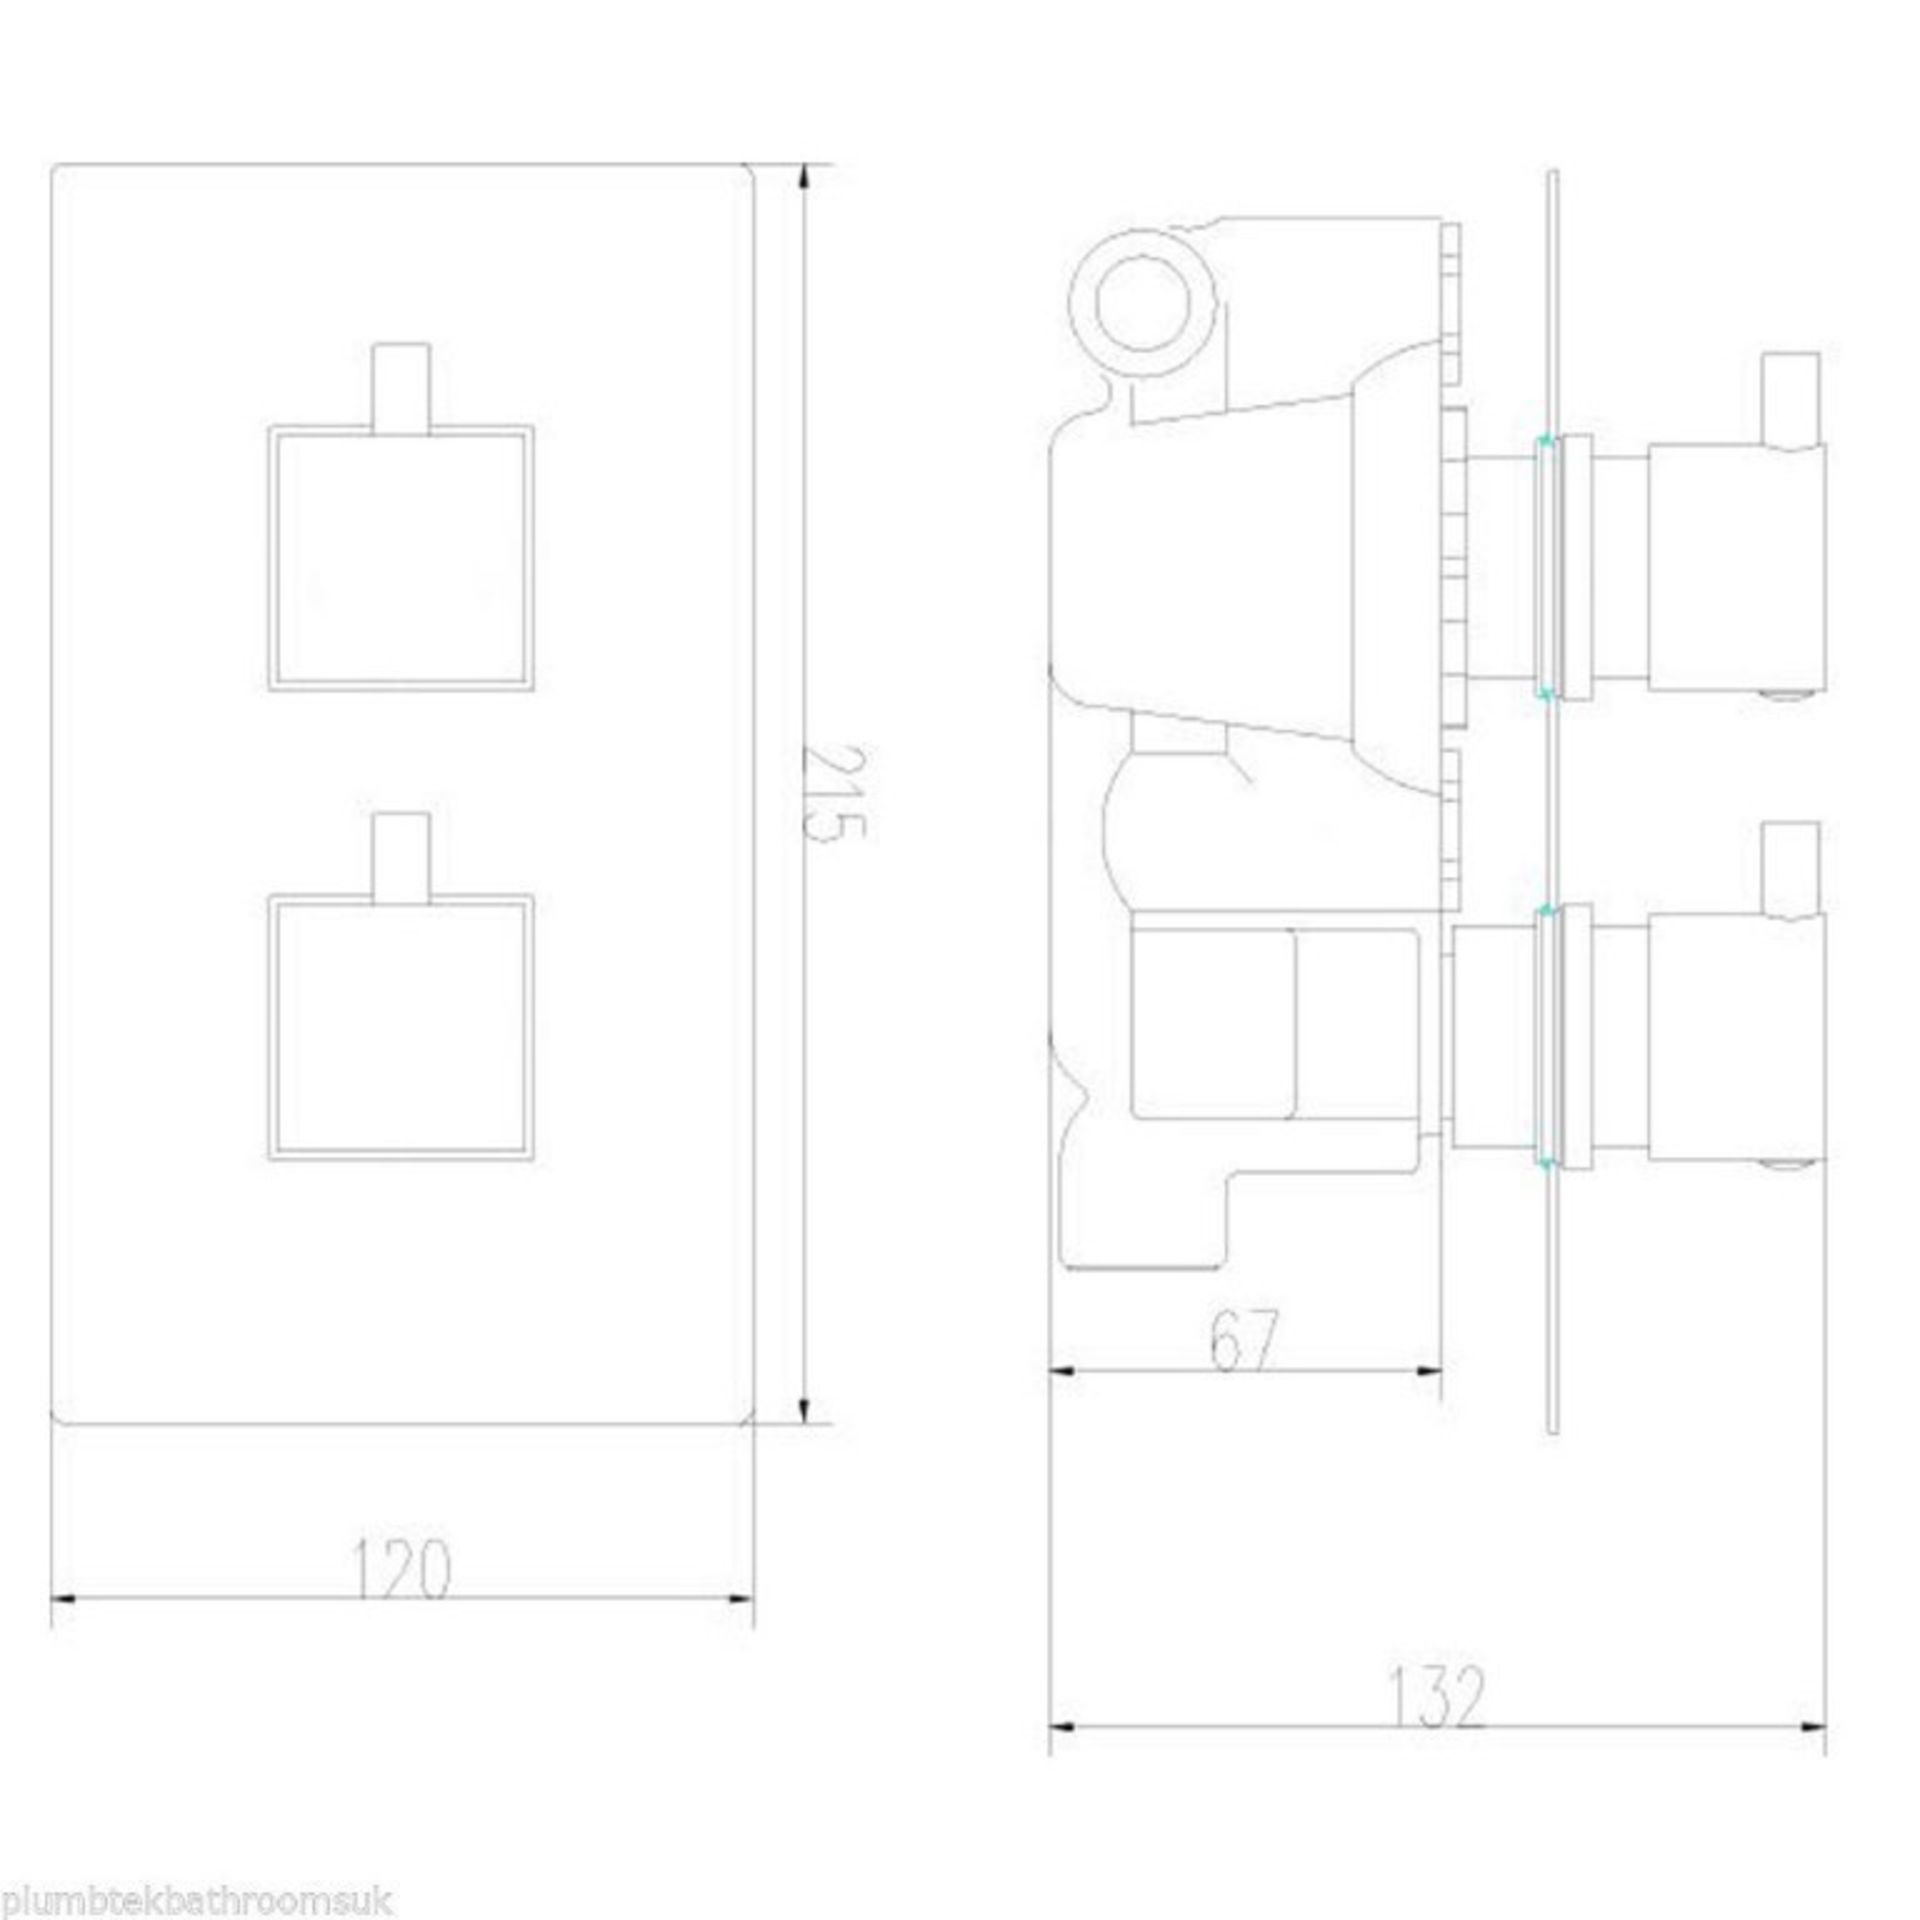 1 x Premier Minimalist Twin Thermostatic Mixer Shower Valve JTY302 with Diverter - PRO3 - CL007 - - Image 4 of 5